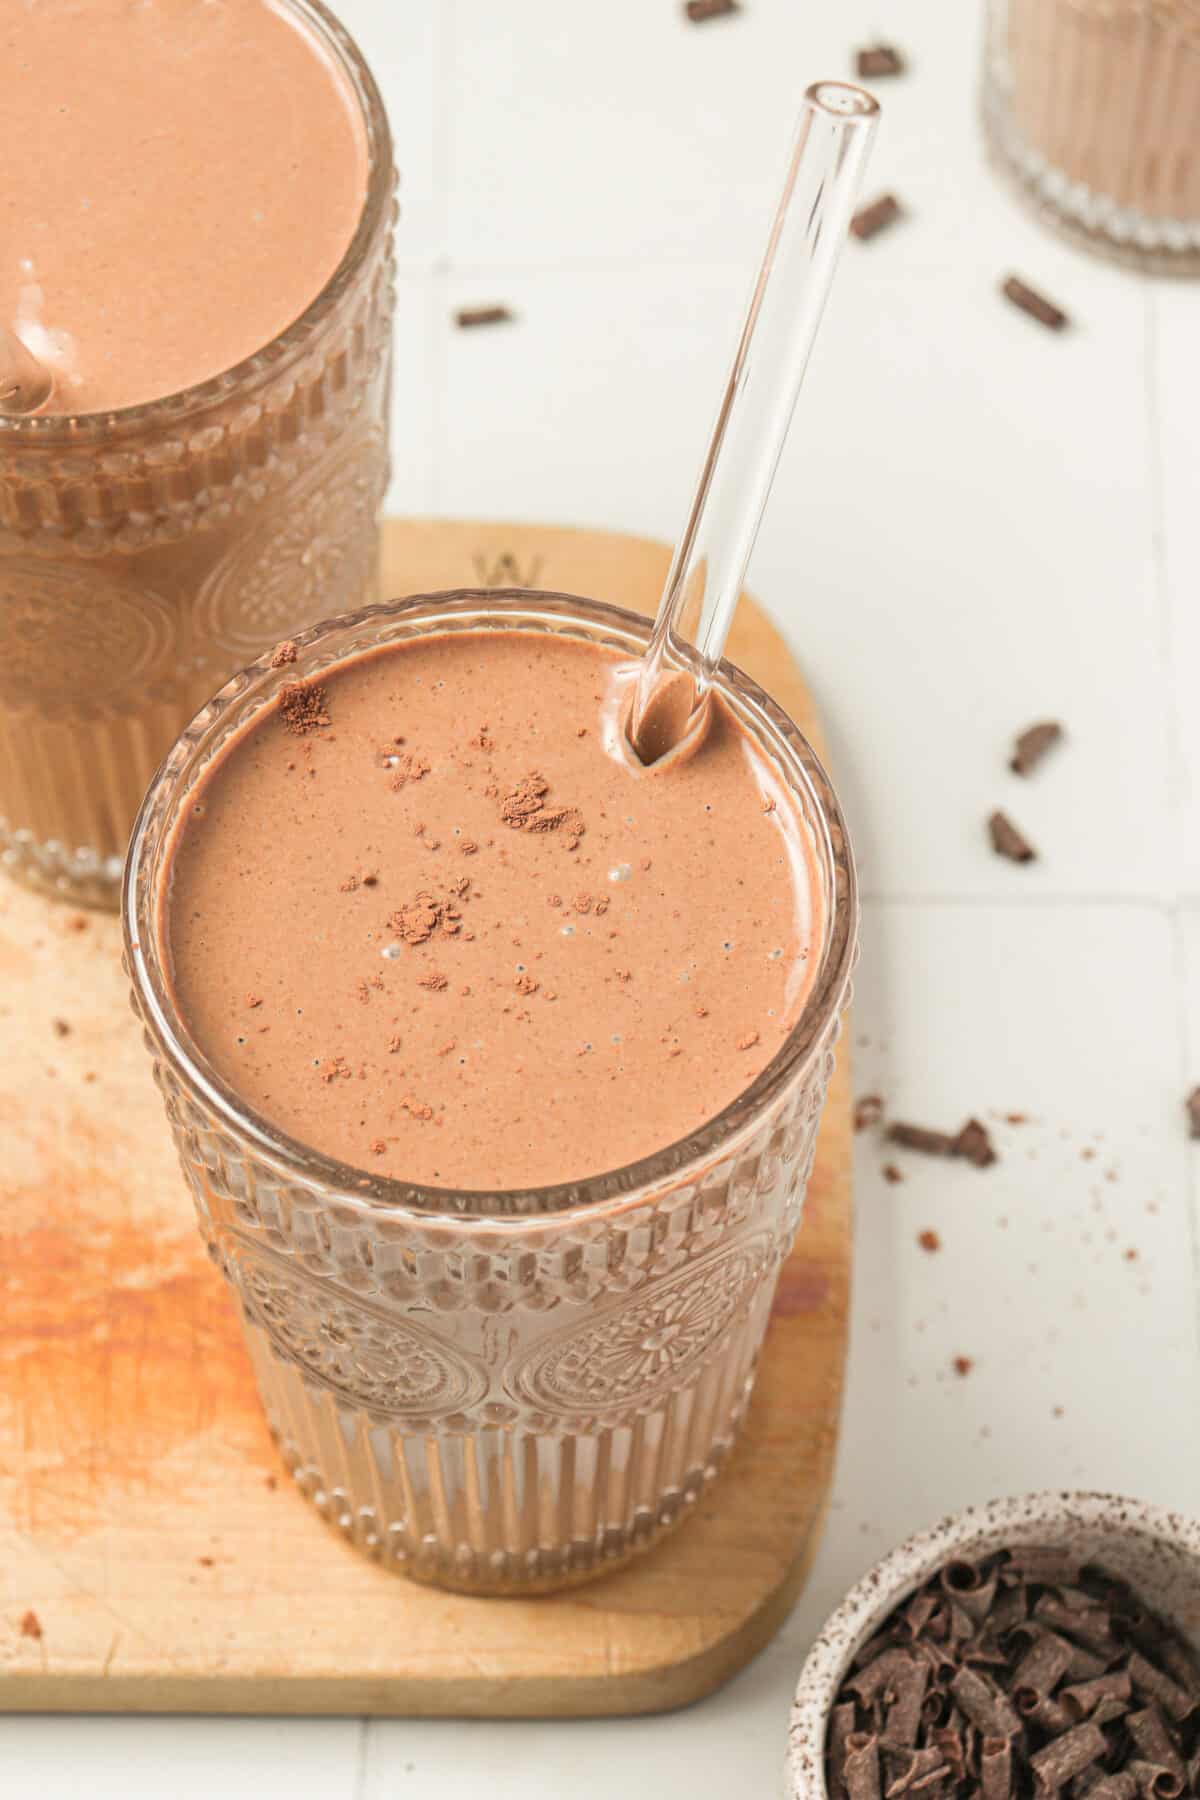 Chocolate shake without toppings. 